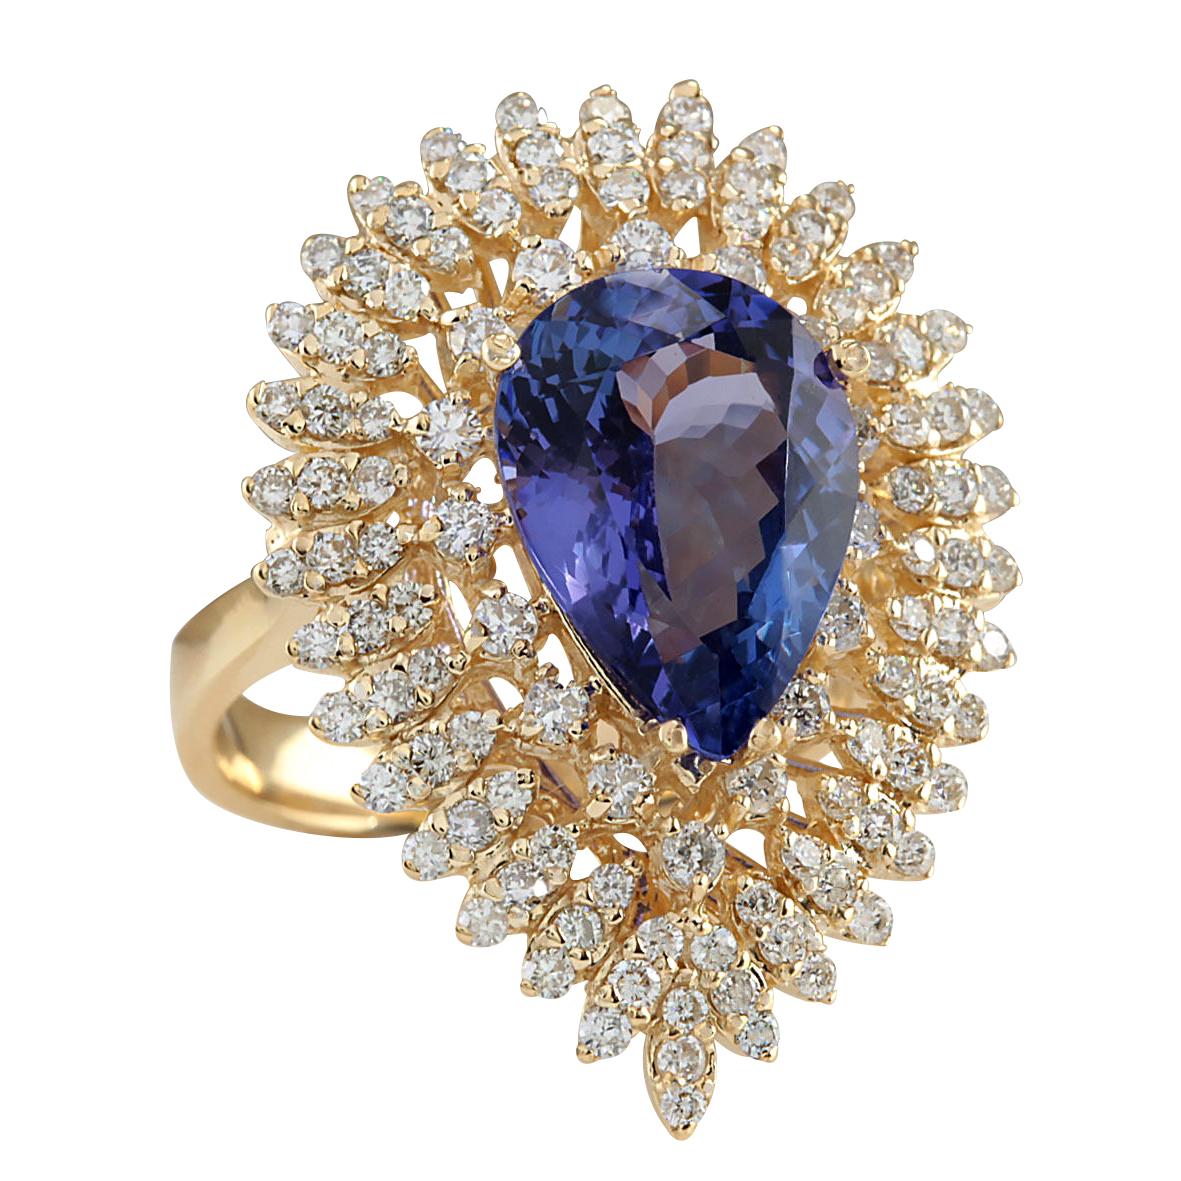 Introducing our exquisite 14K Yellow Gold Diamond Ring, adorned with a captivating 6.31 Carat Tanzanite gemstone. This ring is stamped with the assurance of 14K yellow gold, boasting a total weight of 9.2 grams for a luxurious feel.
The centerpiece